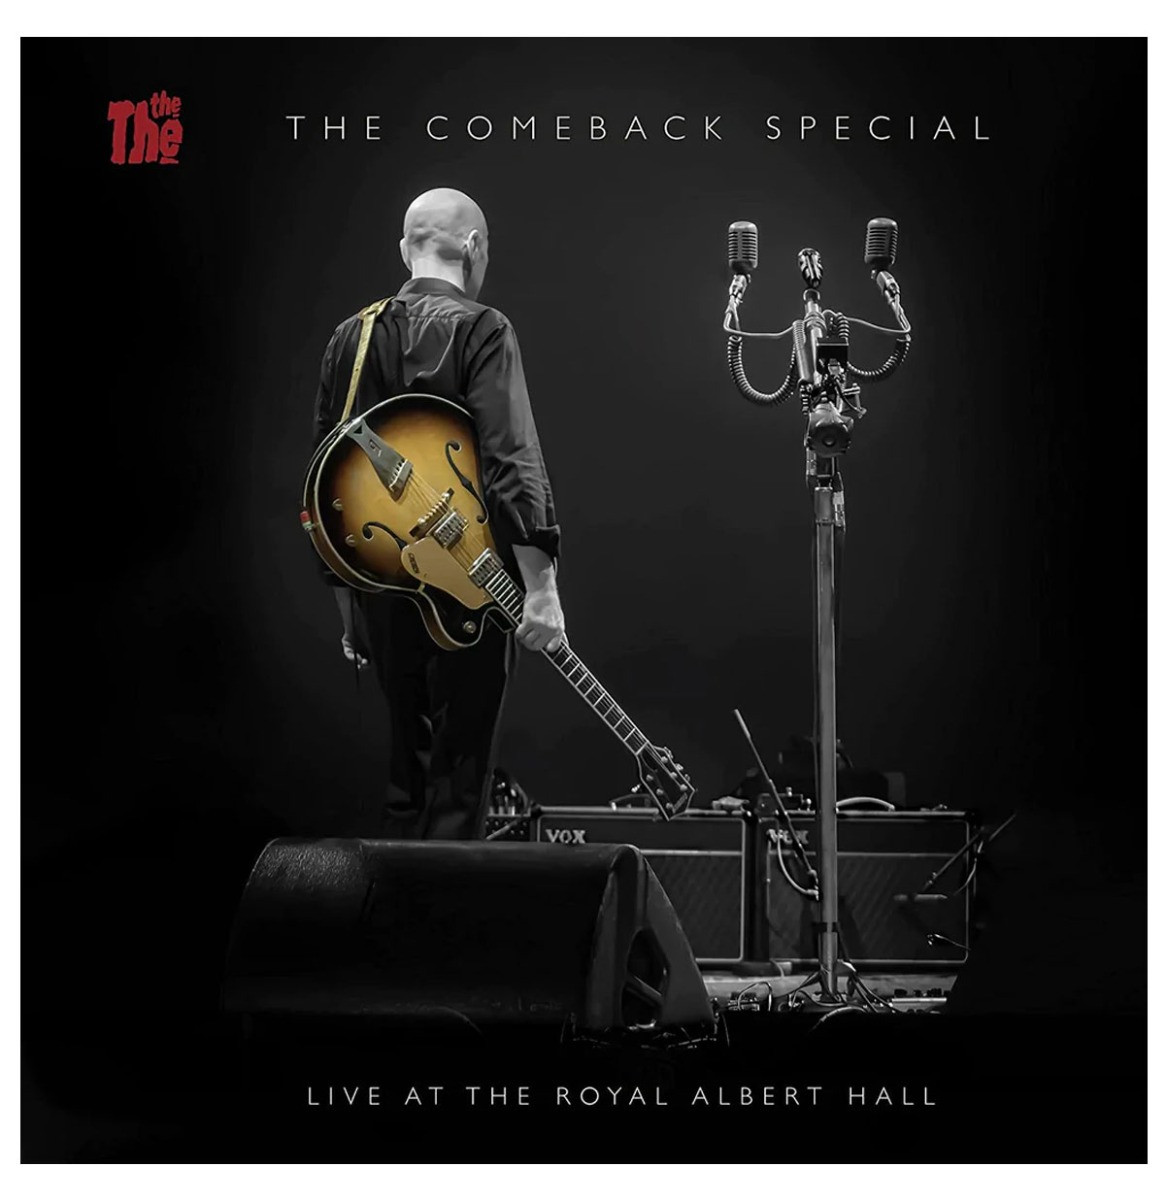 The The - The Comeback Special 3-LP